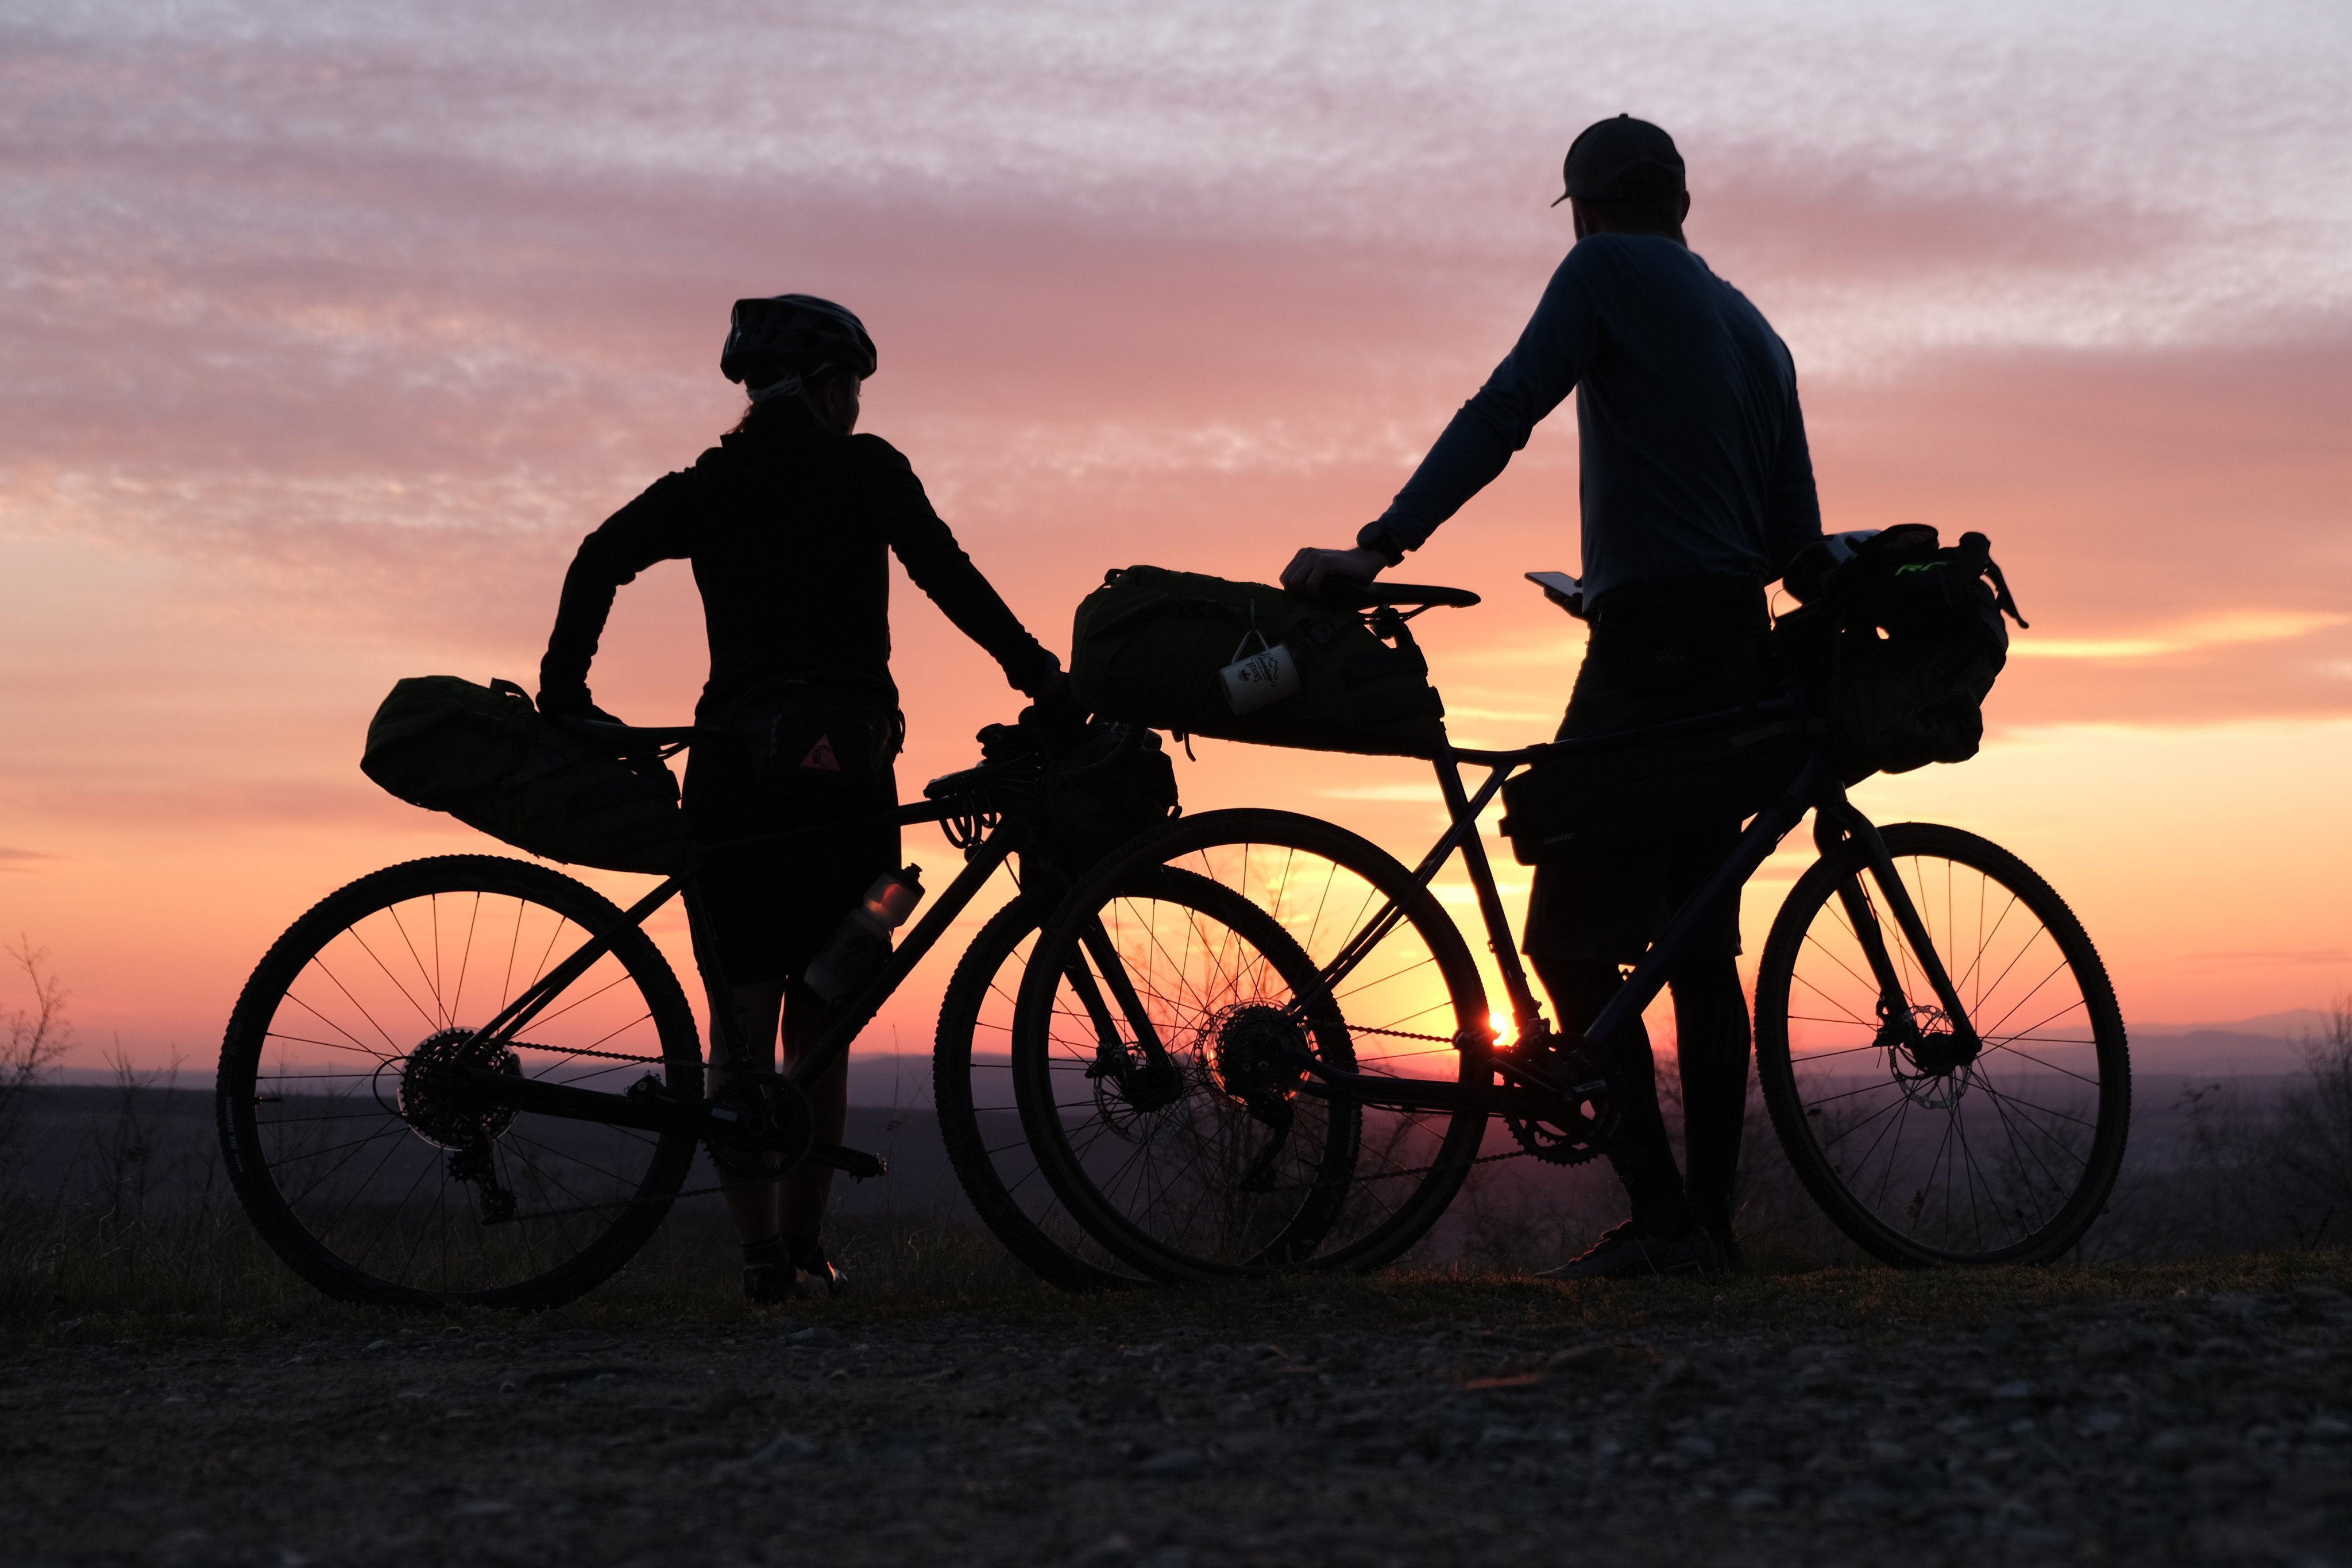 Bike packing became extremely popular during the pandemic as an easily accessible and local adventure option. Photo: Shutterstock